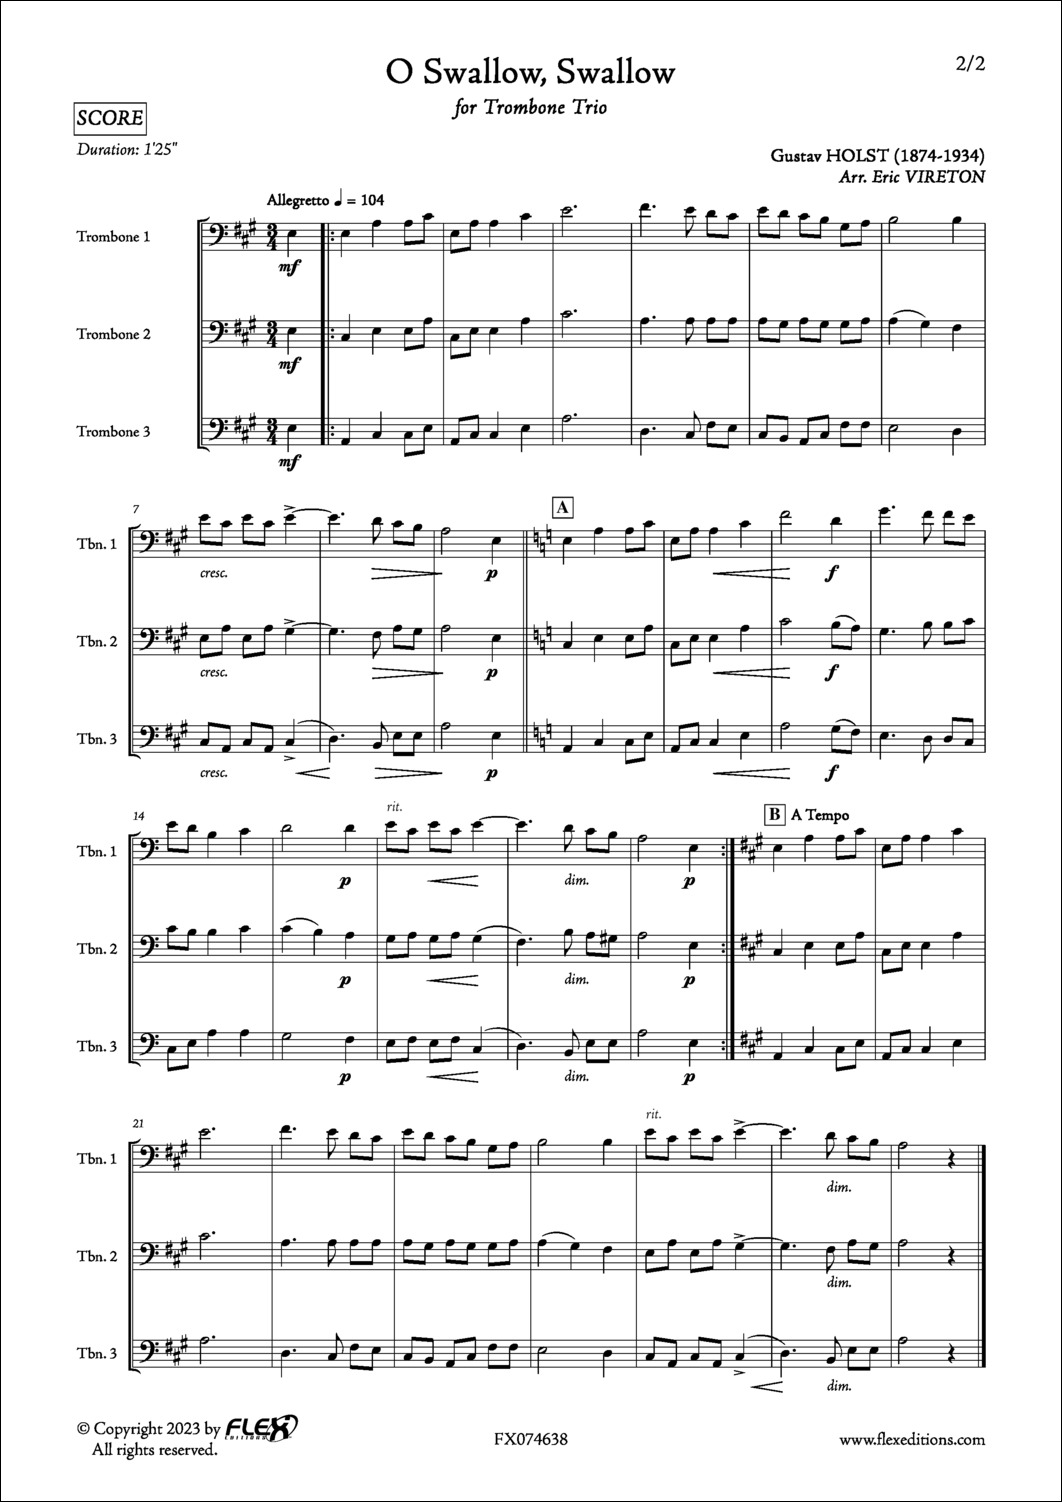 O Swallow, Swallow - G. HOLST - <font color=#666666>Trombone Trio</font>